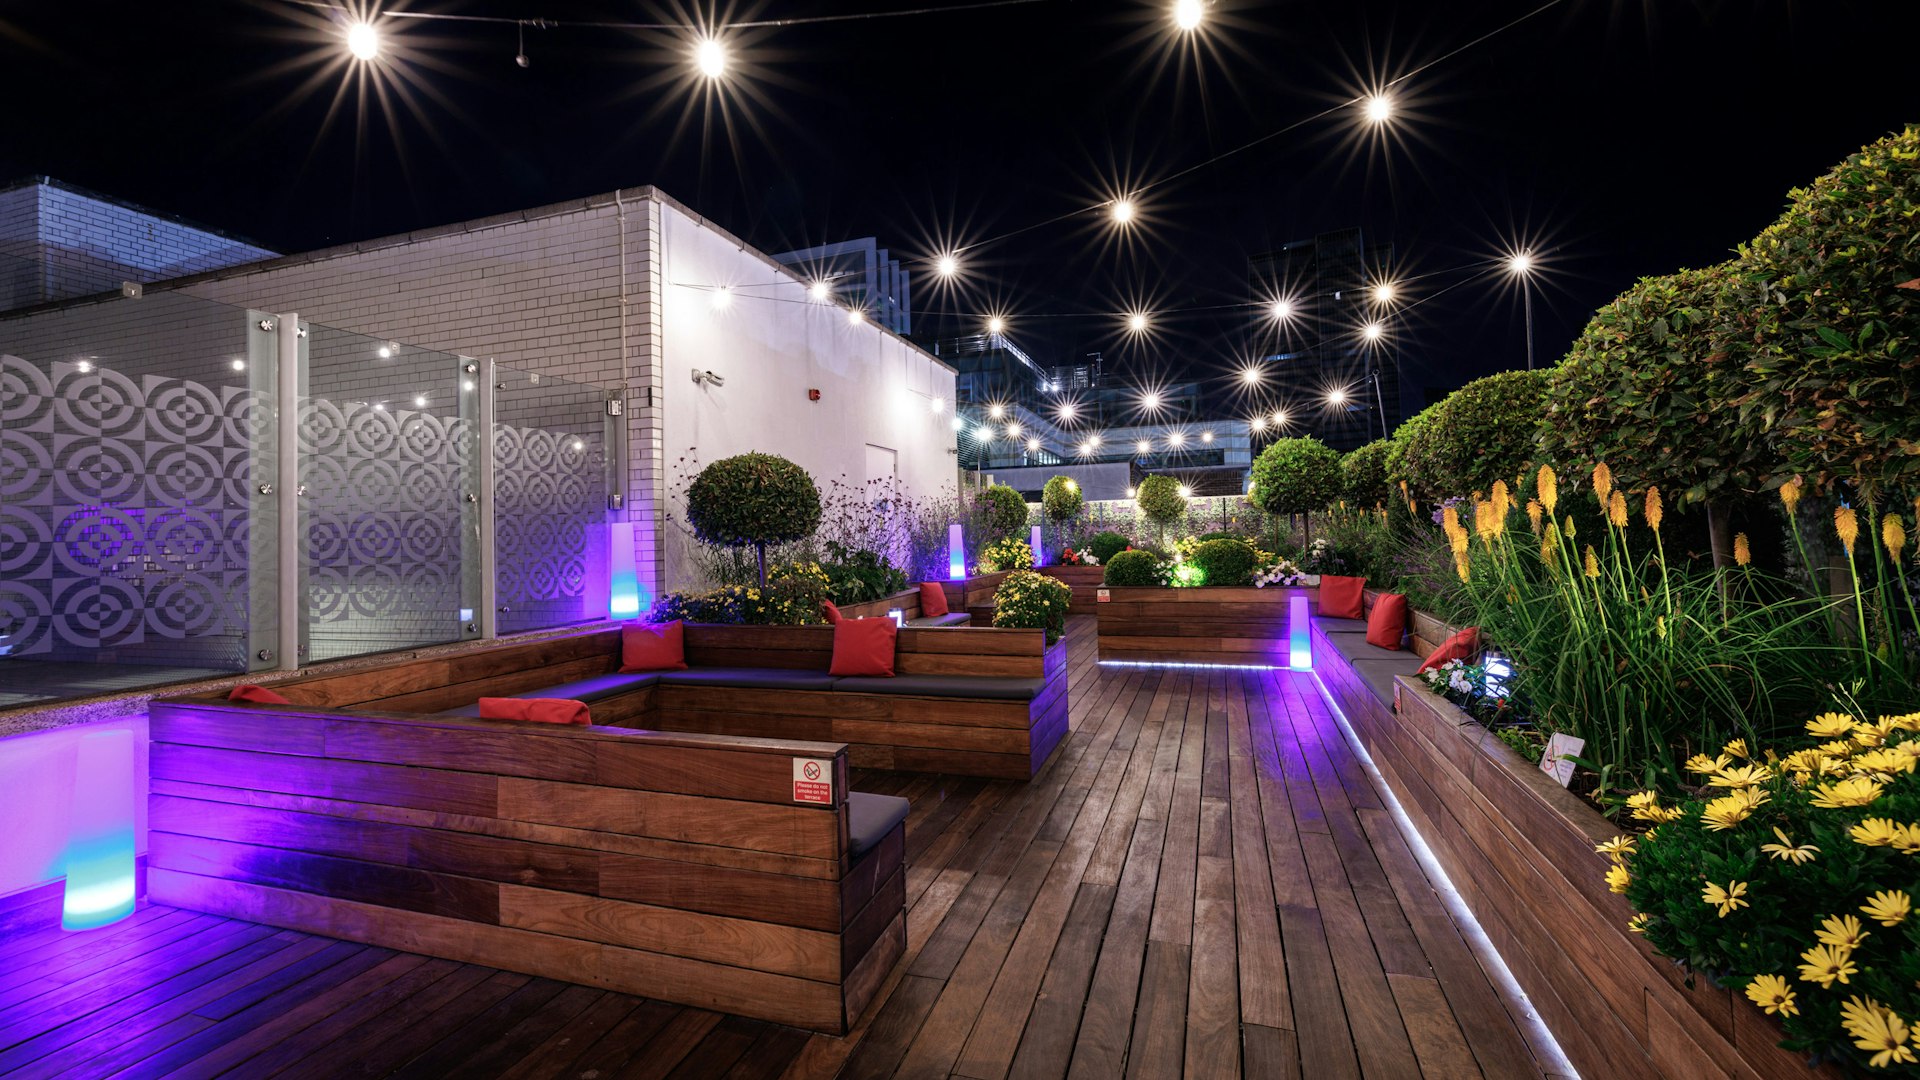 The Rooftop Terrace